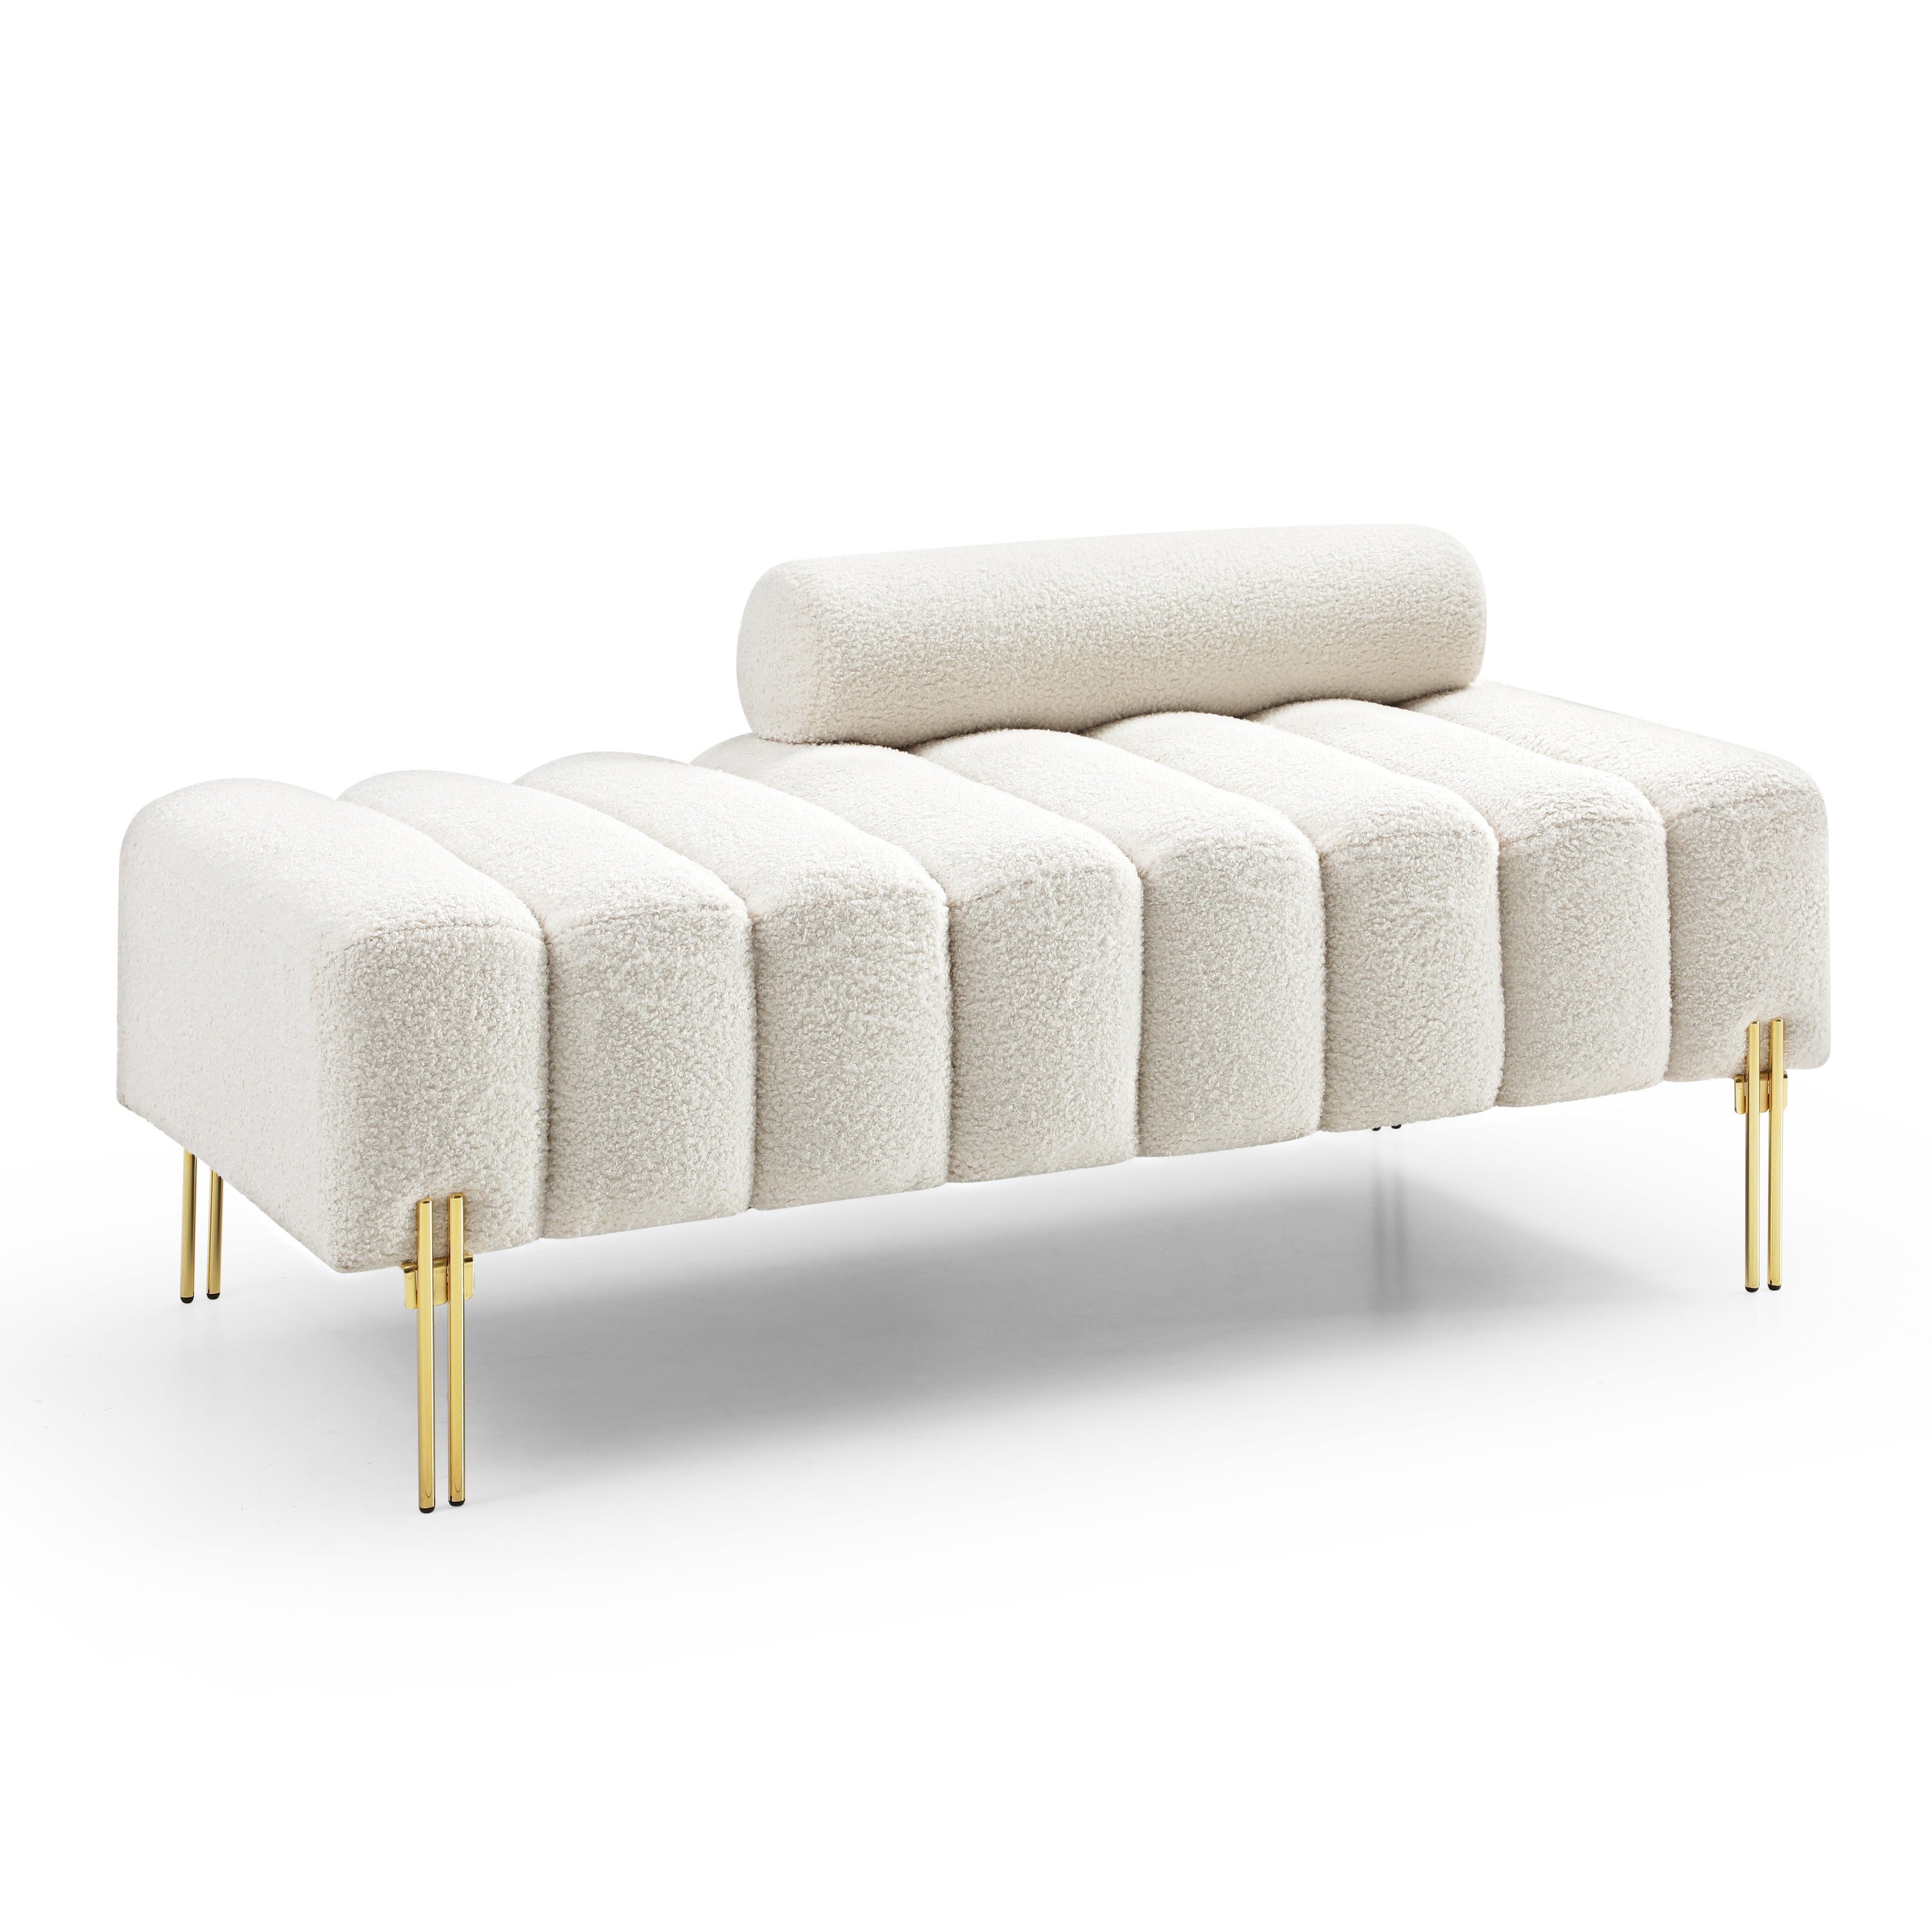 53.2” Width Modern End of Bed Bench Sherpa Fabric Upholstered 2 Seater Sofa Couch Entryway Ottoman Bench Fuzzy Sofa Stool Footrest Window Bench with Gold Metal Legs - Beige